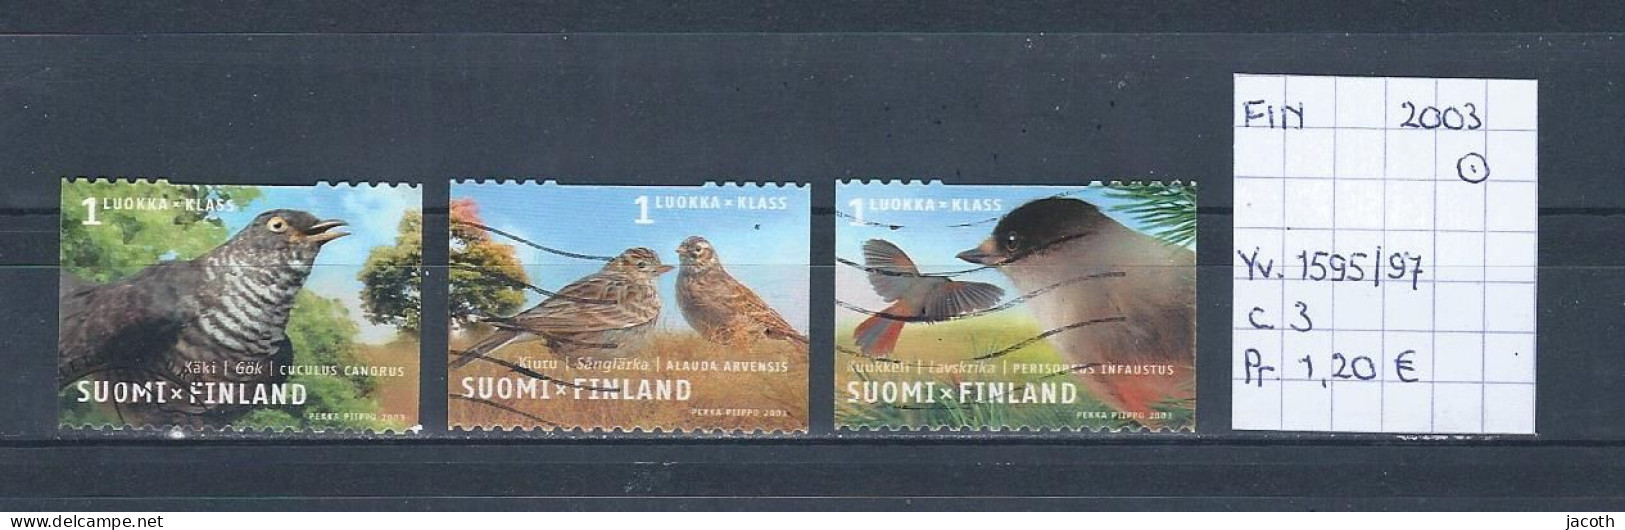 (TJ) Finland 2003 - YT 1595/97 (gest./obl./used) - Used Stamps